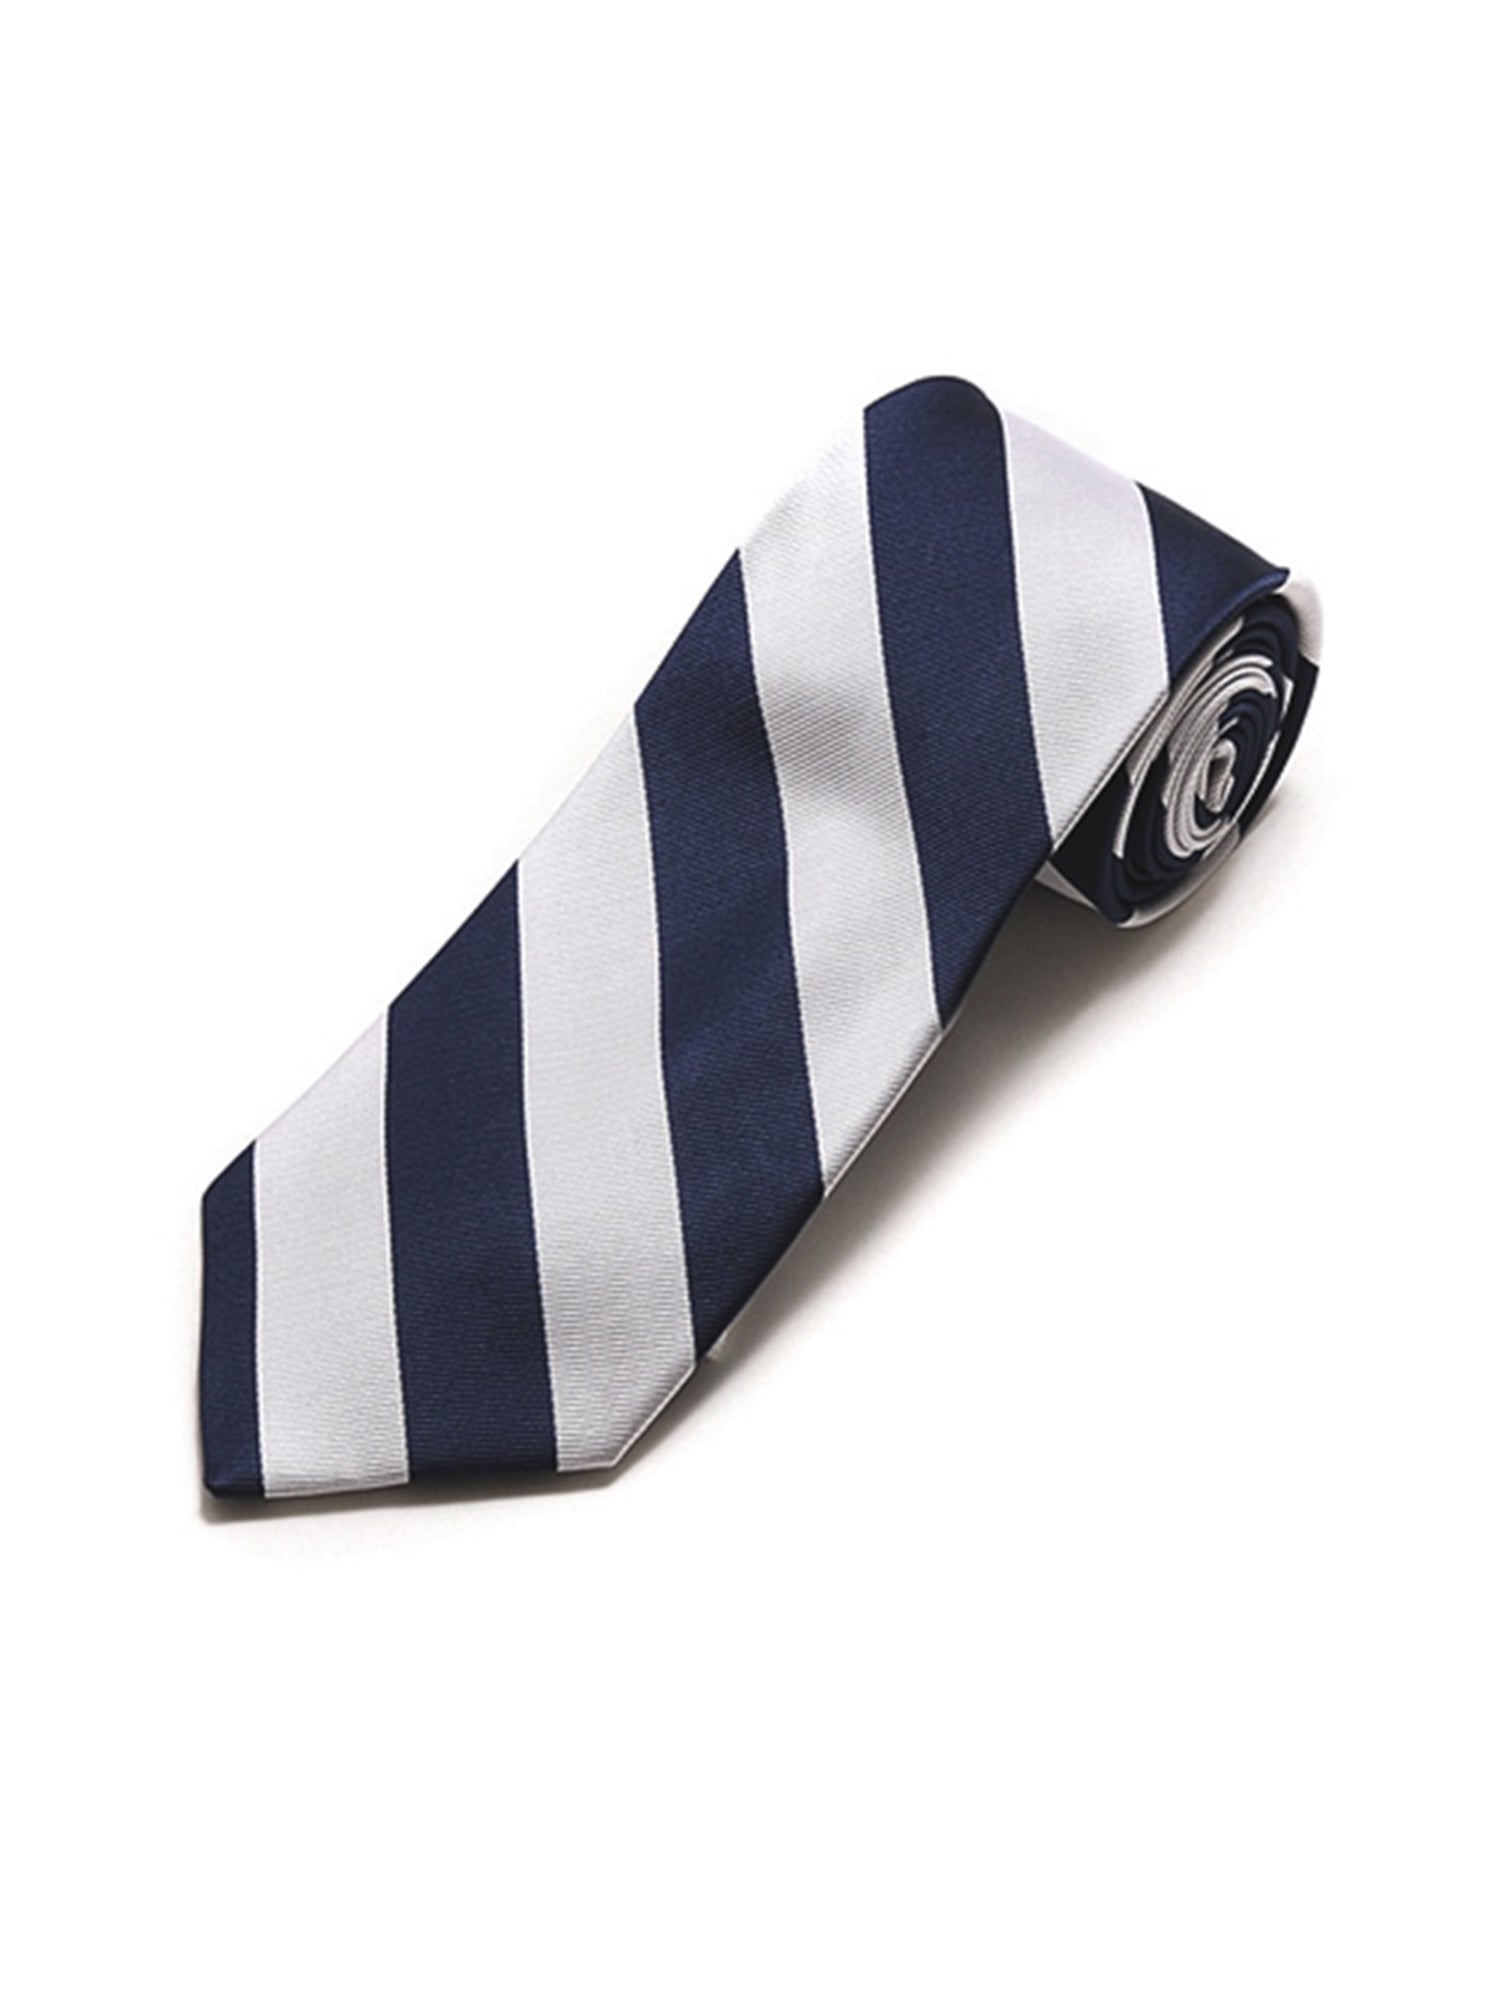 Men's College Striped Colored Silk Long Or X-Long Neck Tie Neck Tie TheDapperTie Navy & White 57" long & 3.25" wide 